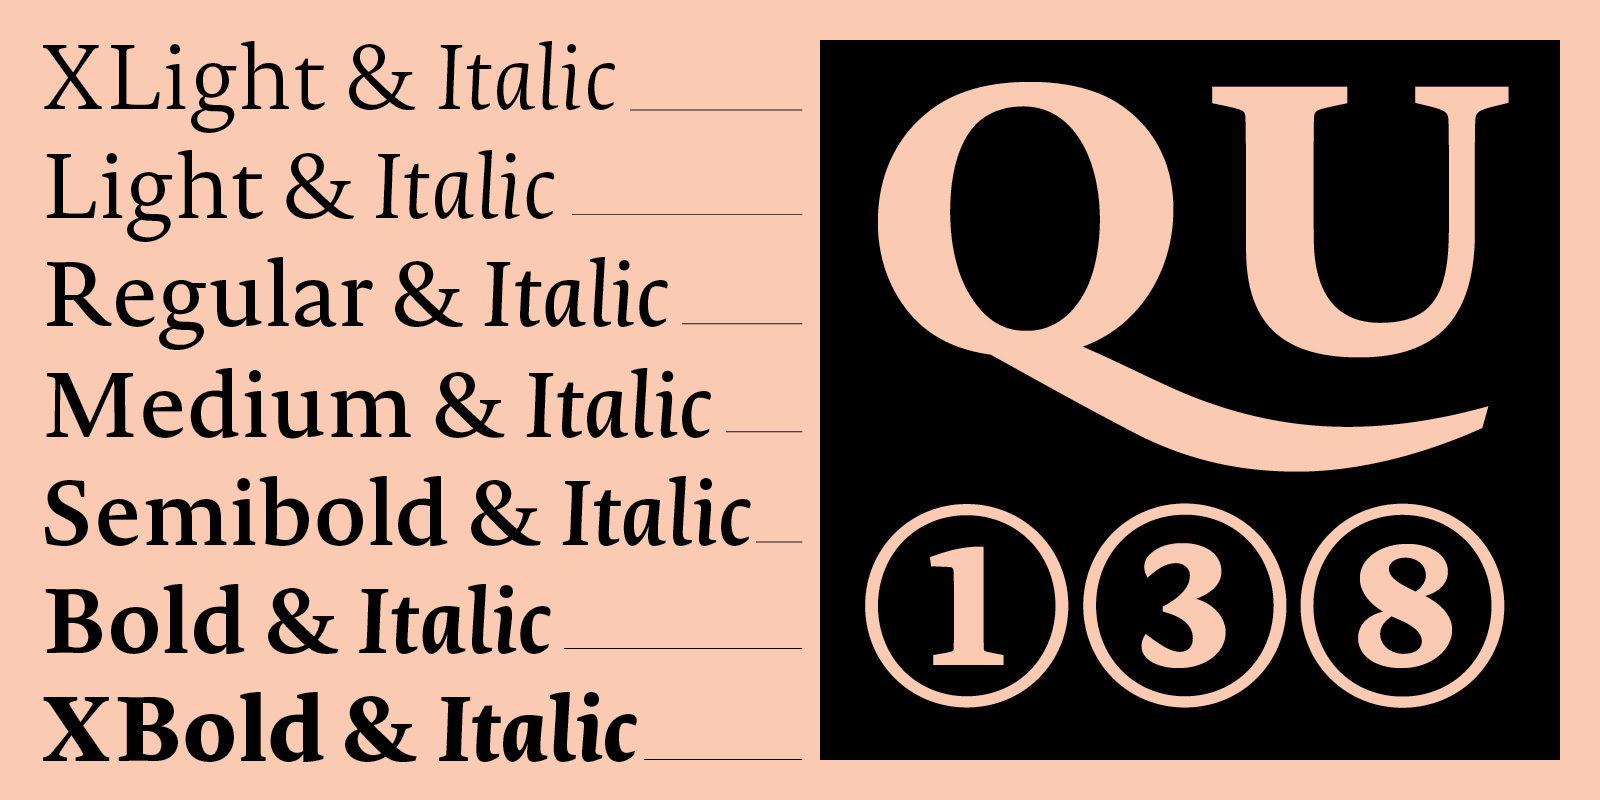 Card displaying Novel typeface in various styles